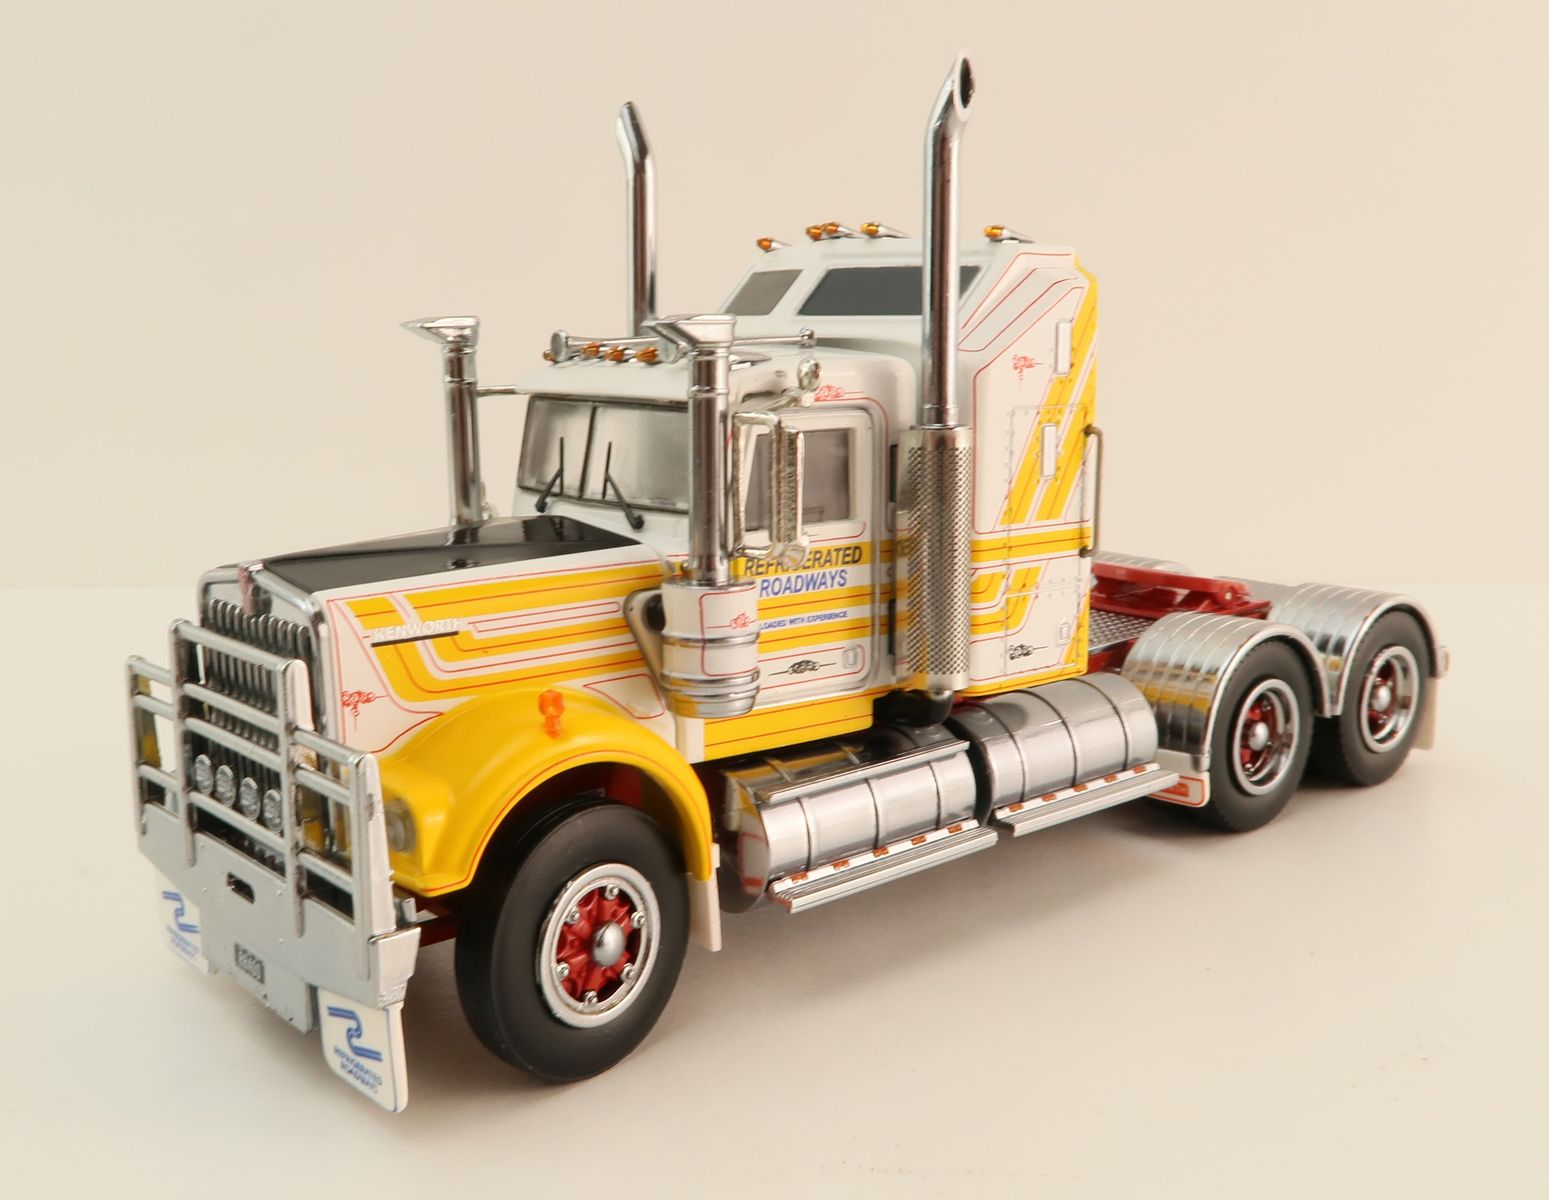 Product Image - Iconic Replicas - Australian Kenworth W900 6x4 Prime Mover Truck Refrigerated Roadways - Scale 1:50